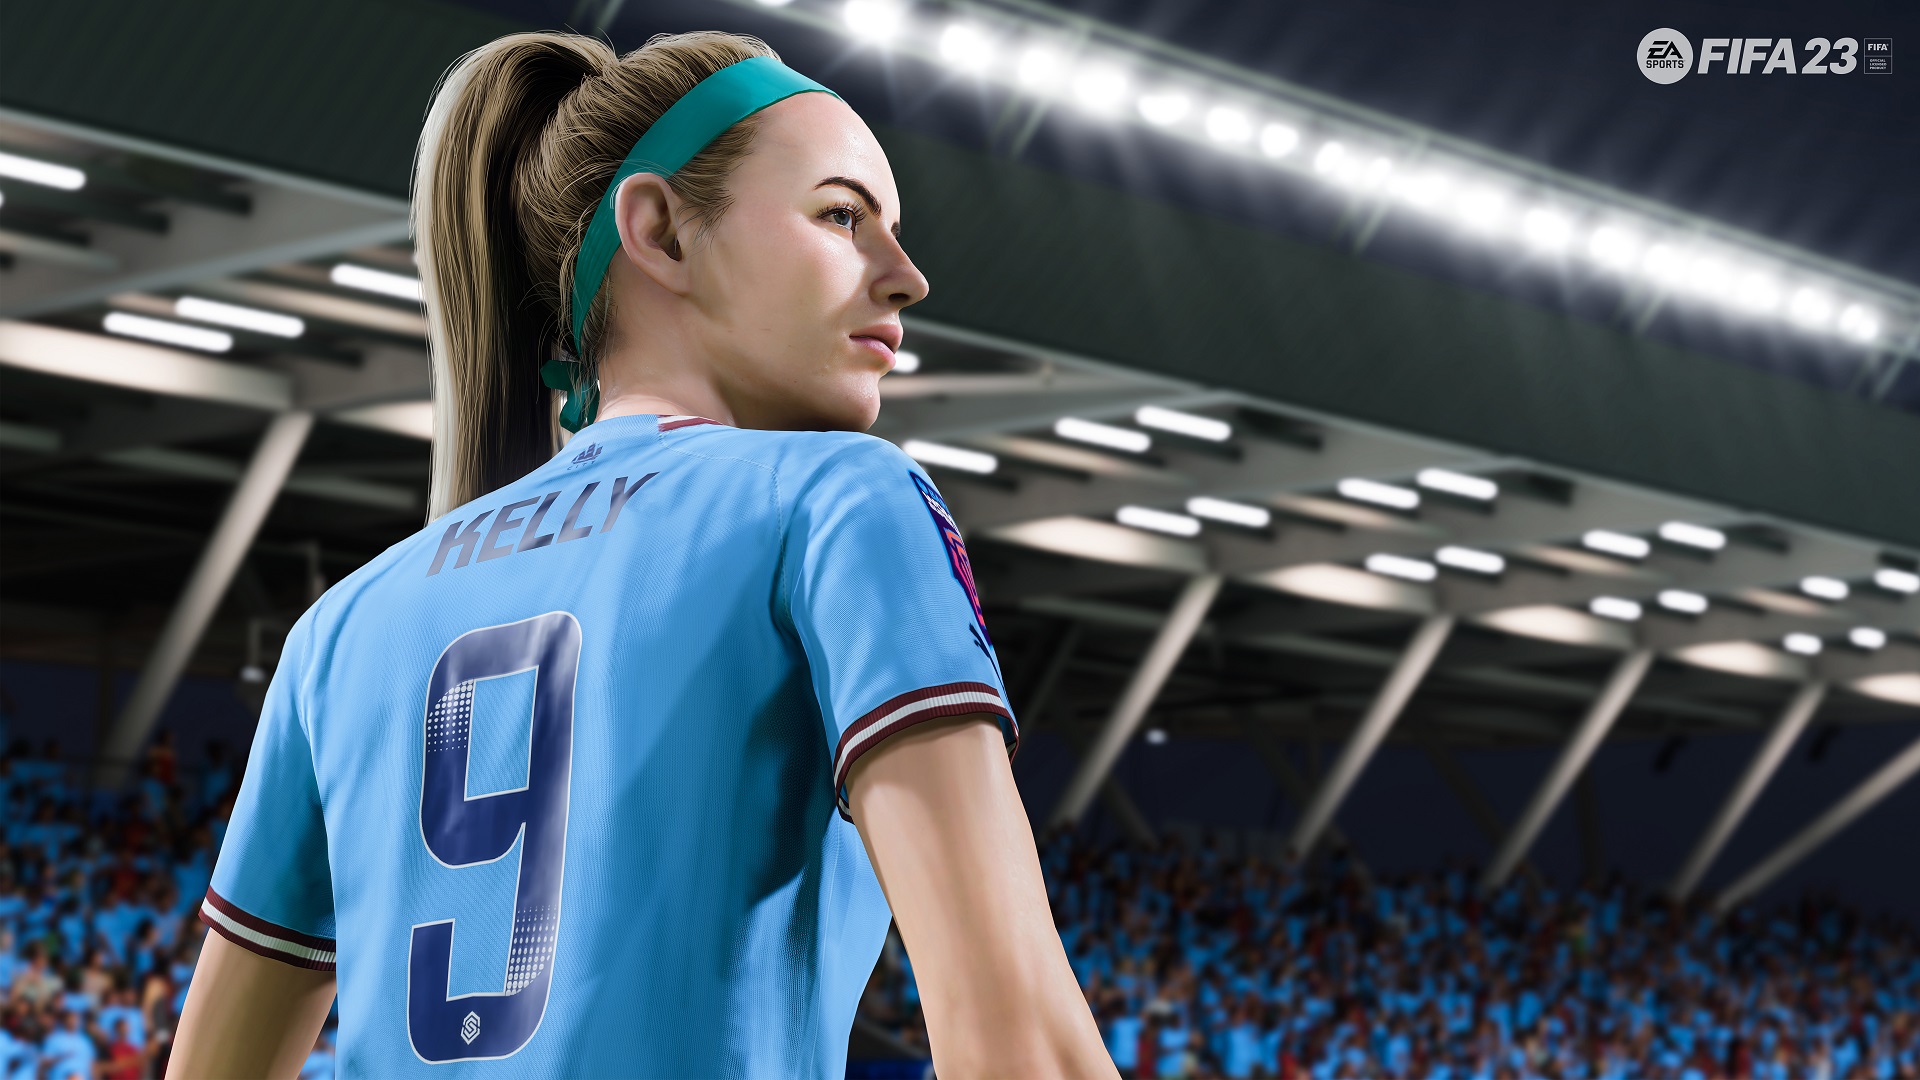 Screenshot of soccer player Chloe Kelly in FIFA 23 on the pitch looking over to her rightback over her right